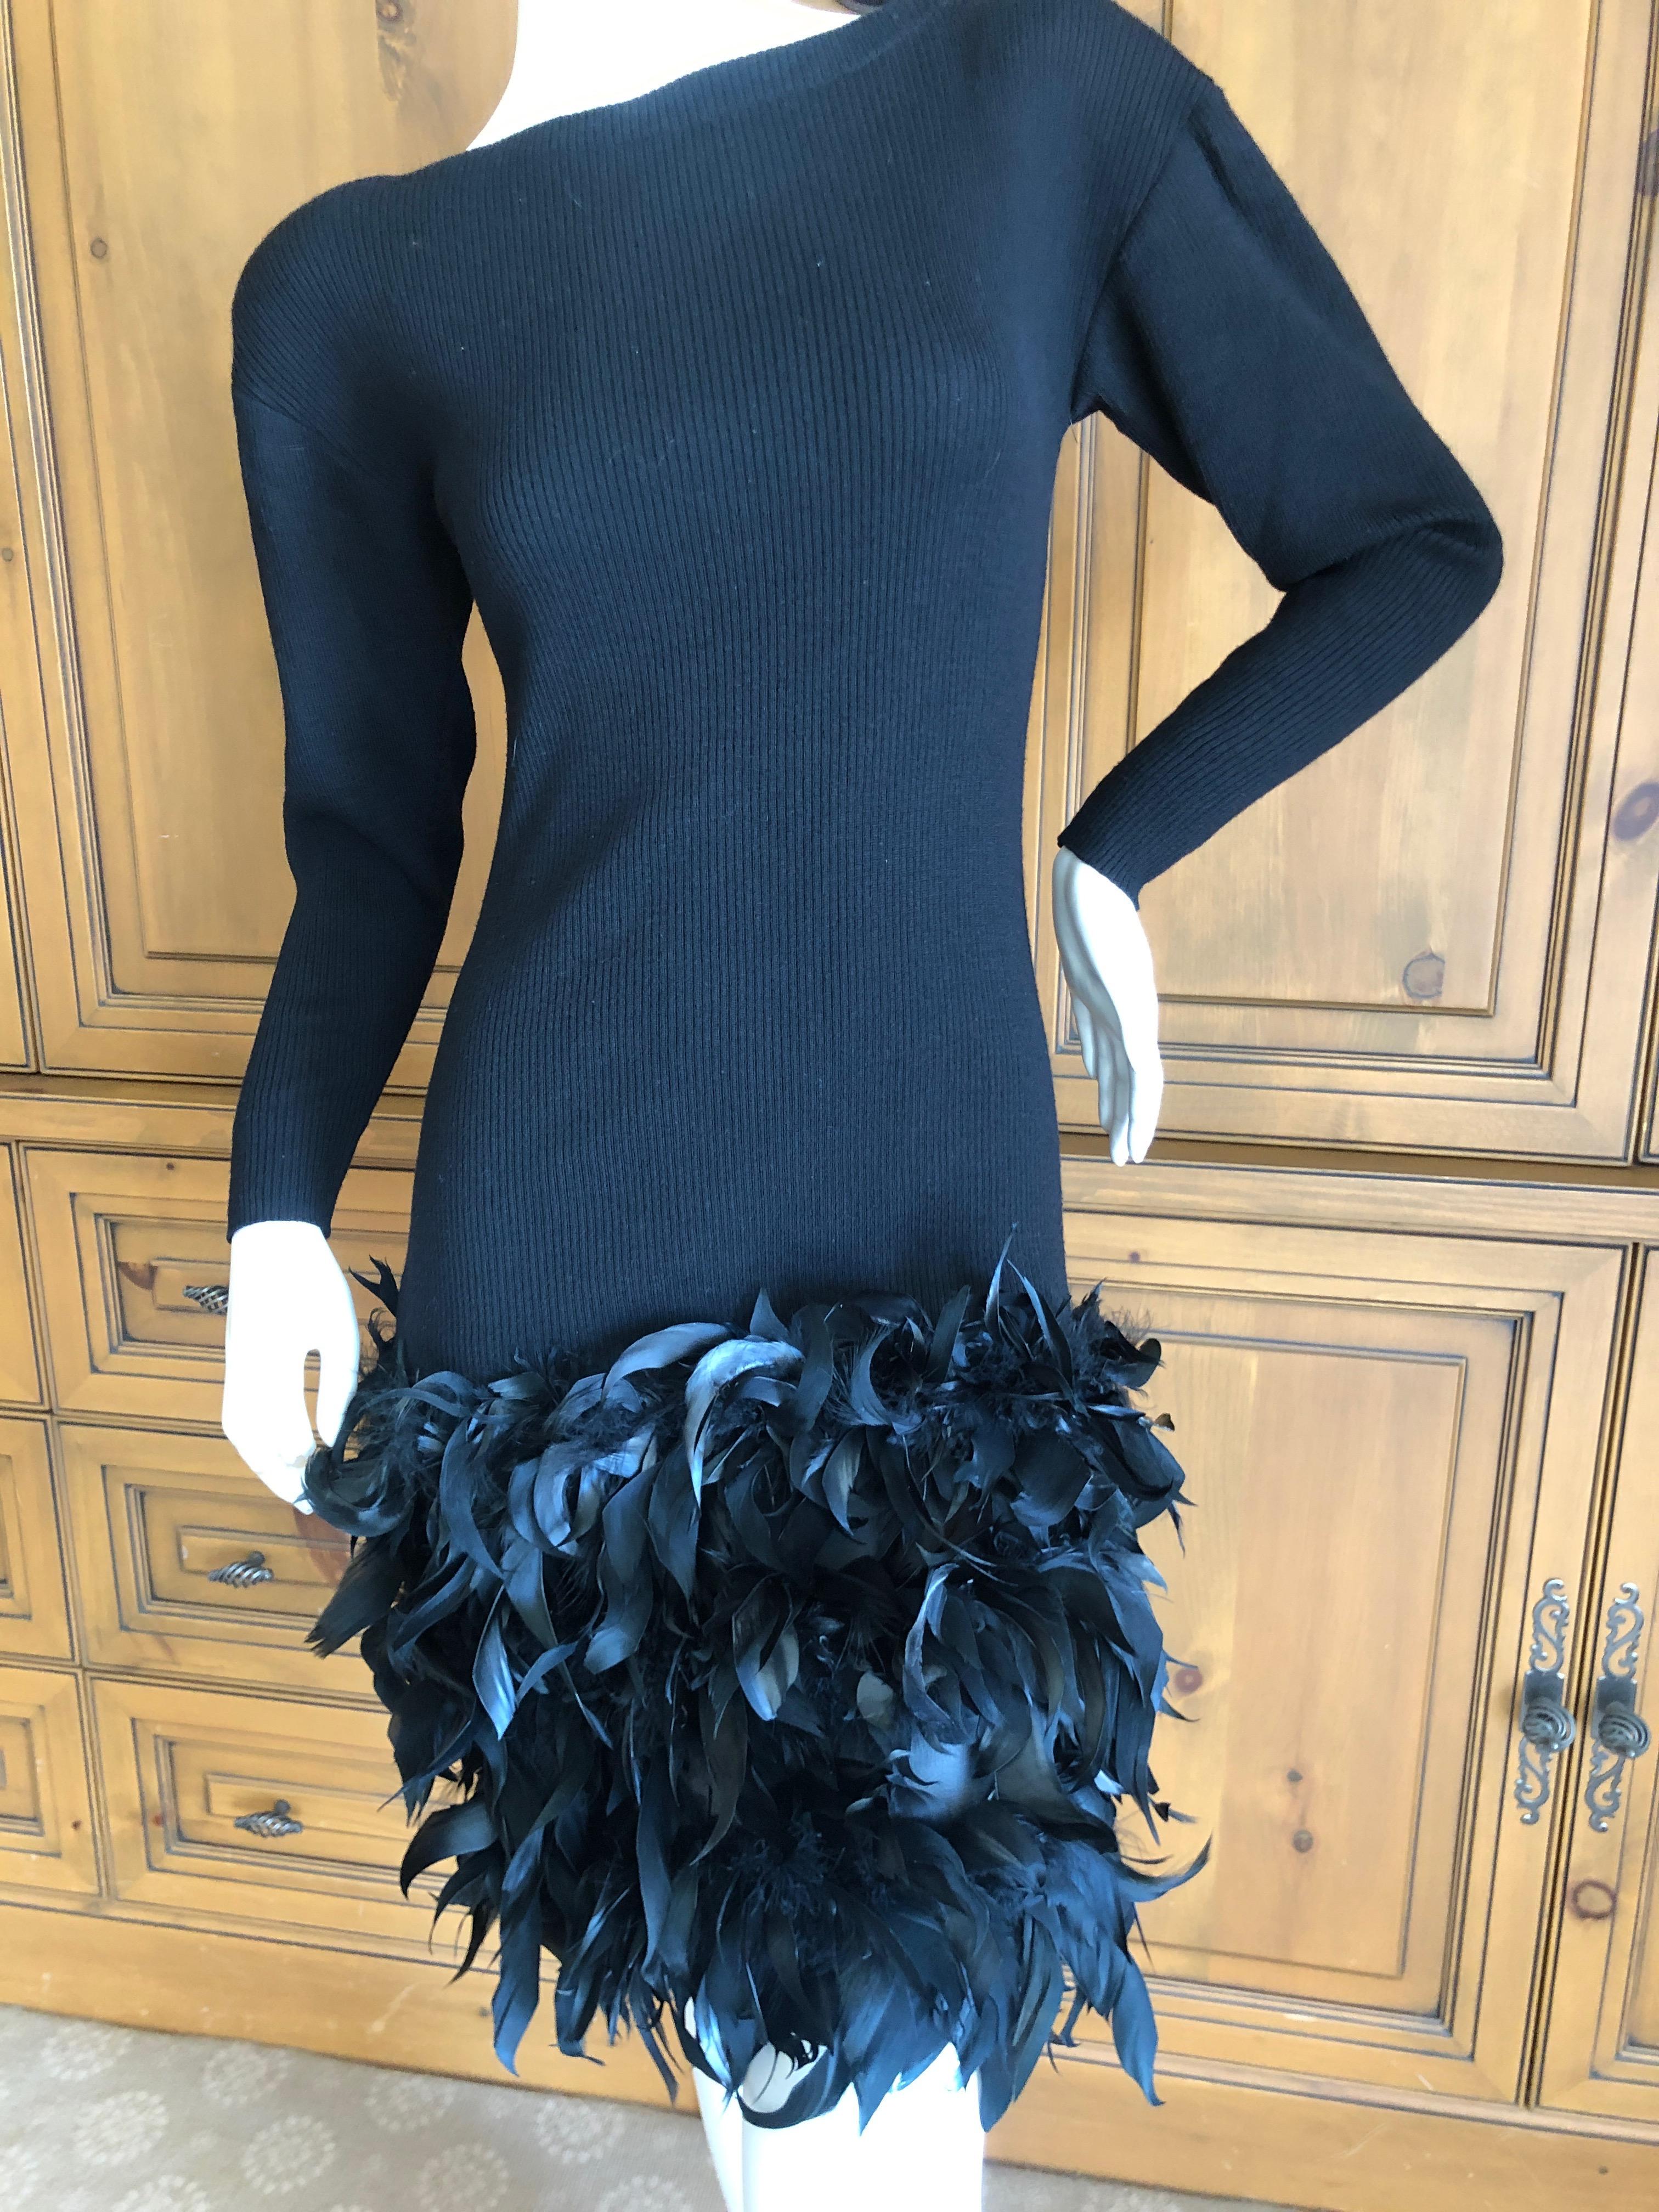 Yves Saint Laurent Rive Gauche Vintage Little Black Dress with Feathers by Maislon Lamarie on the Skirt.
The dress is knit wool, and has considerable stretch, with shoulder pads which could be removed.
Marked size 34
Bust 32